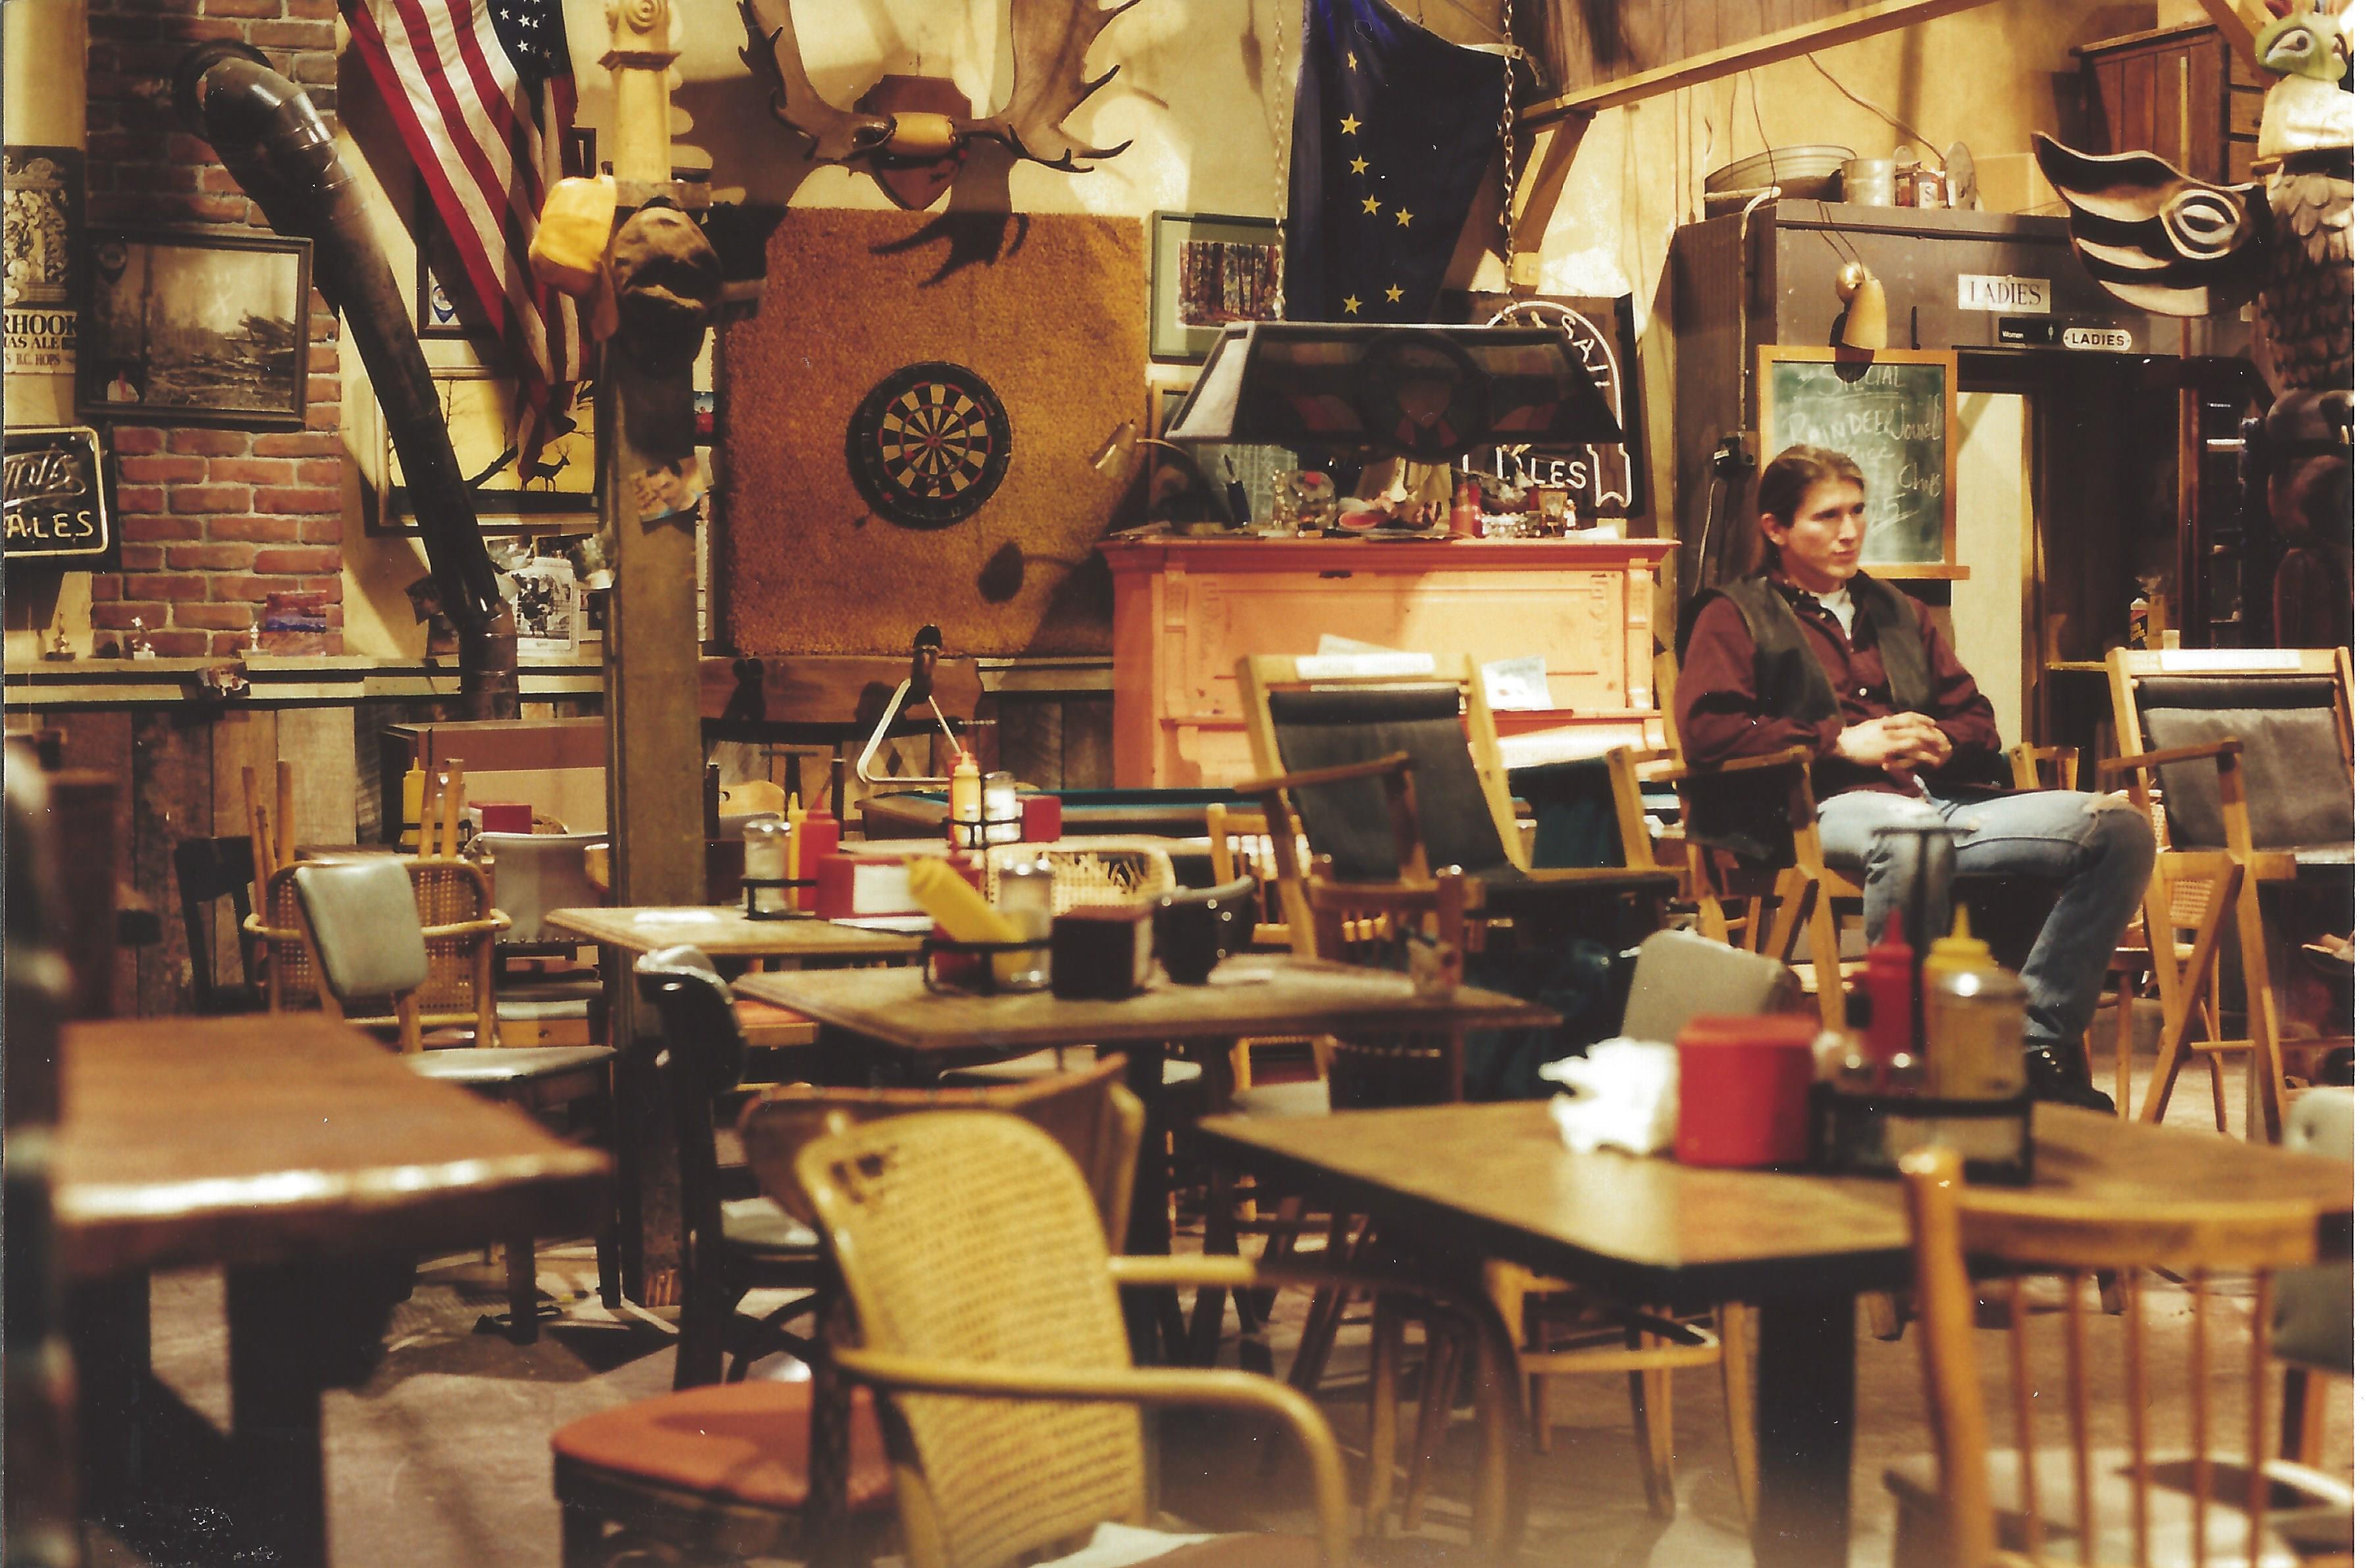 On the set of NORTHERN EXPOSURE, THE BRICK